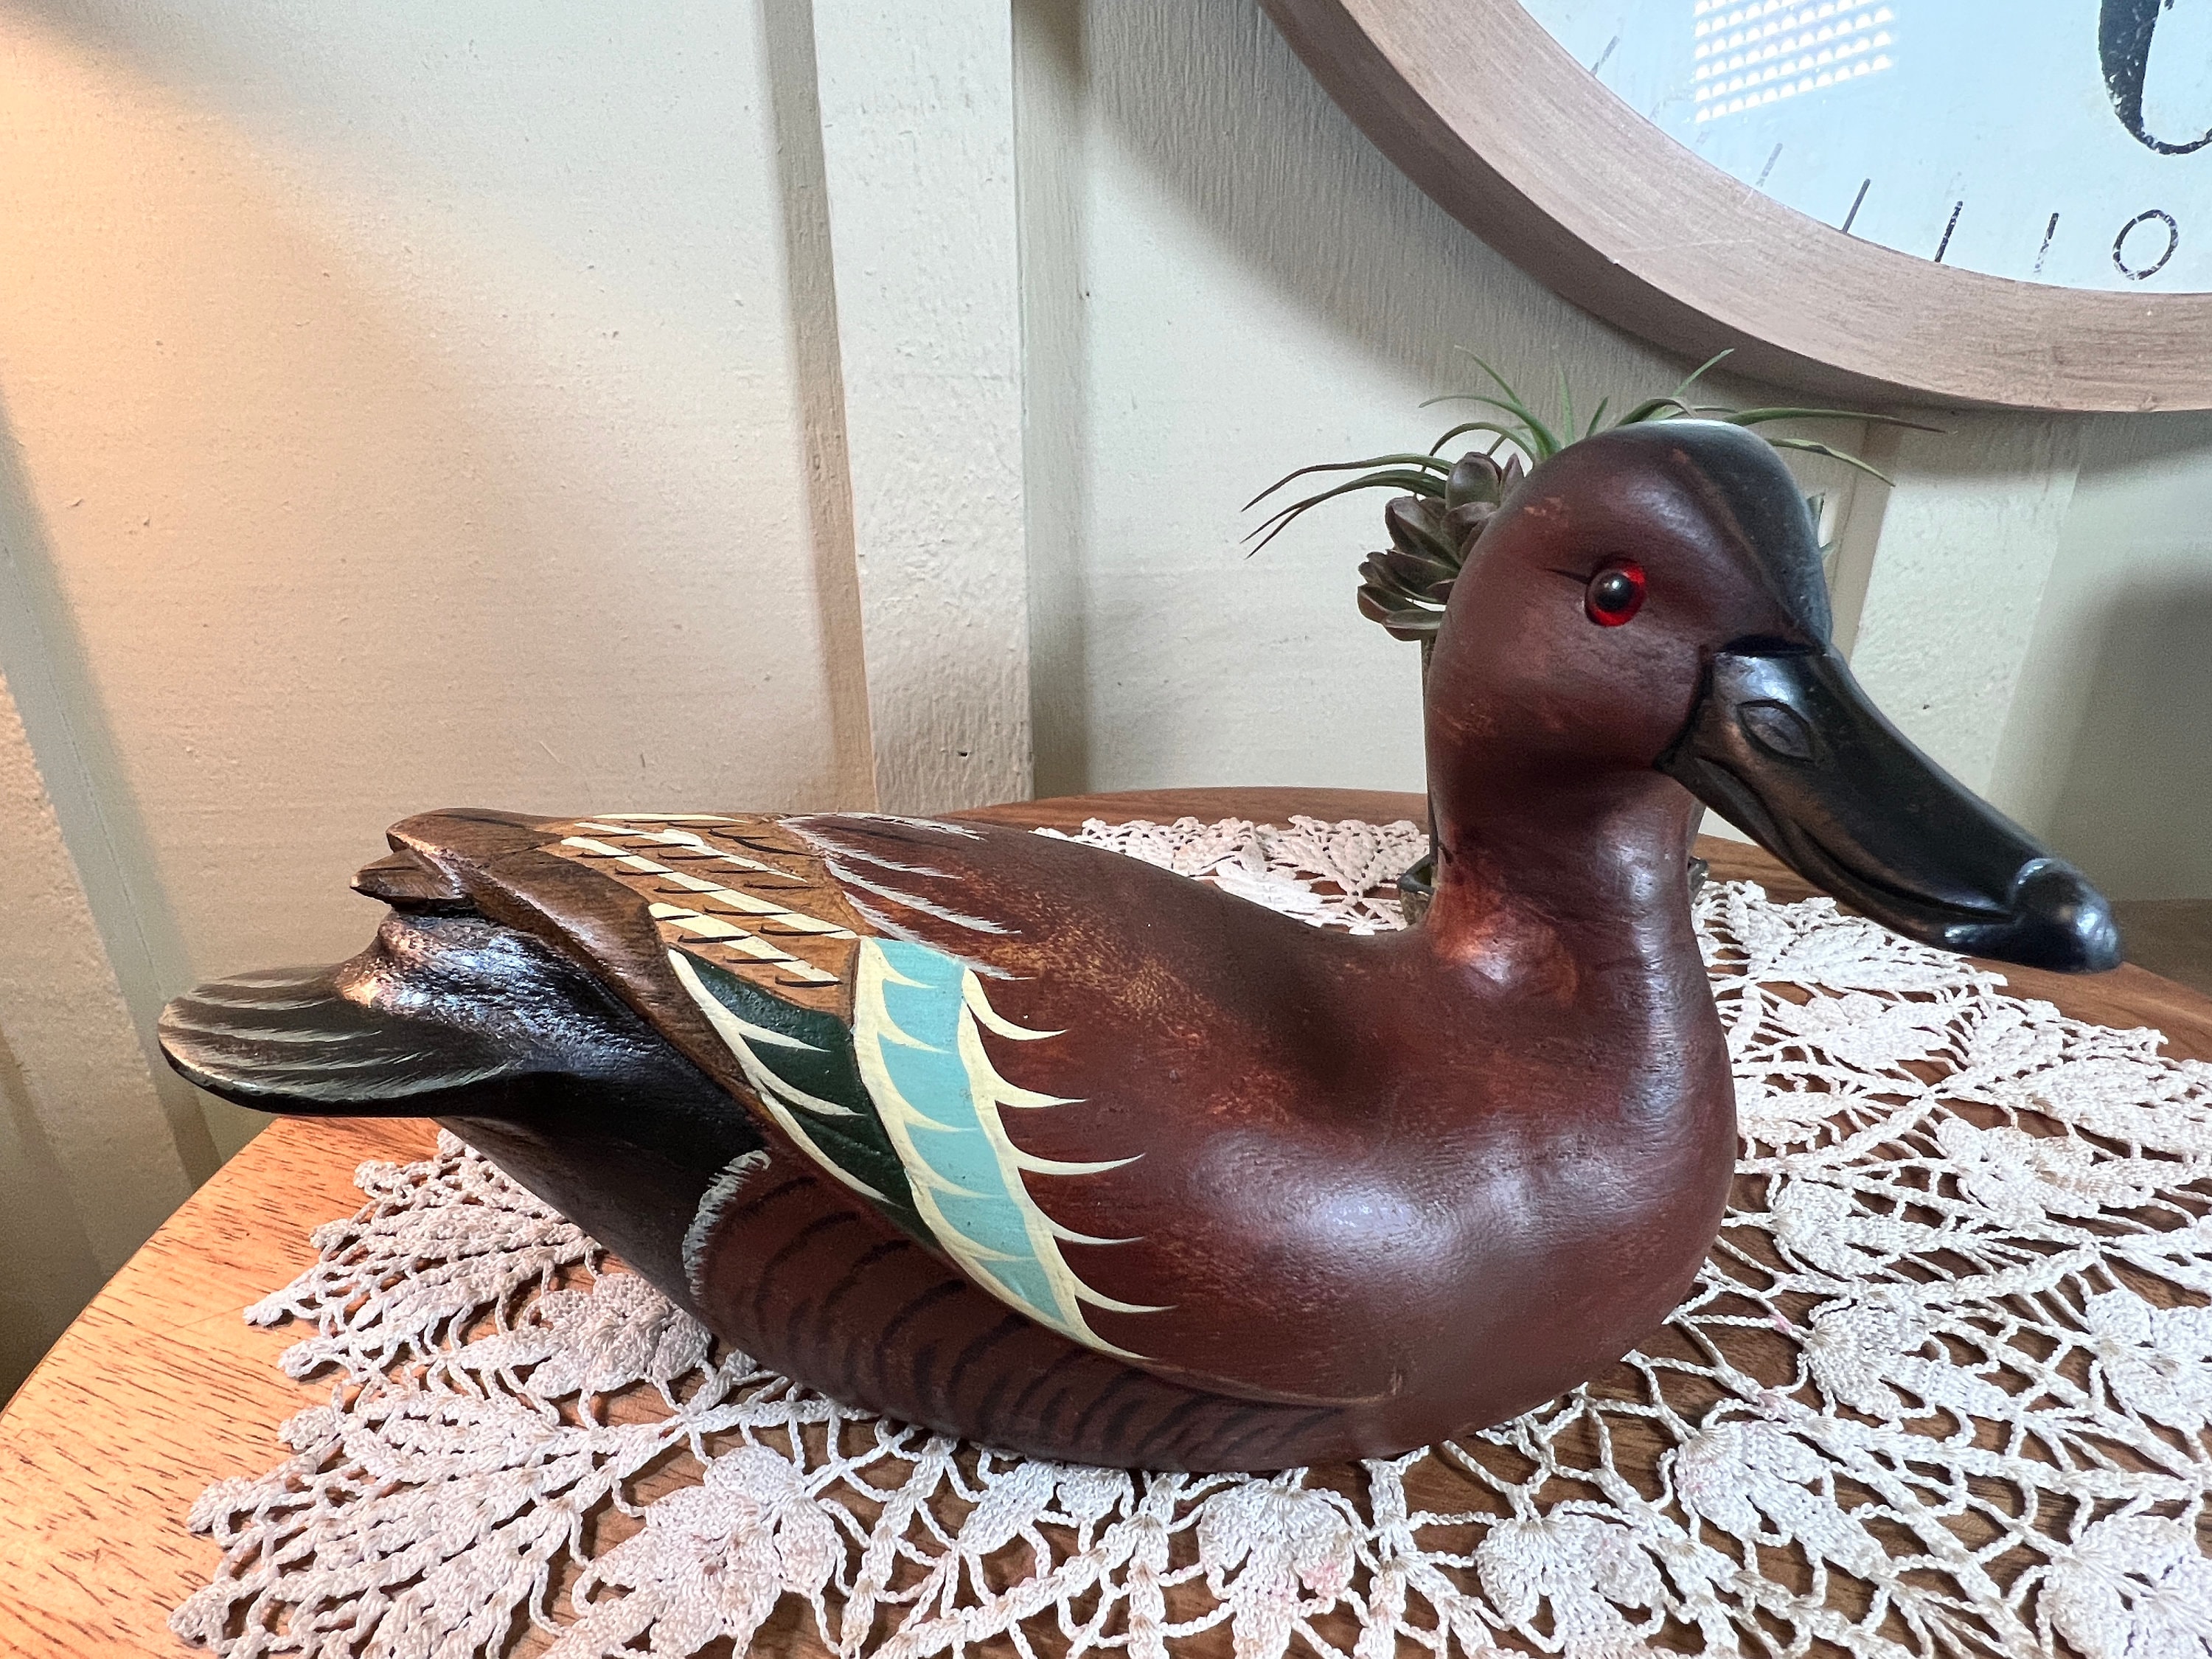 Ducks Unlimited Authorized Collection Wood Duck Decoy – Authentic